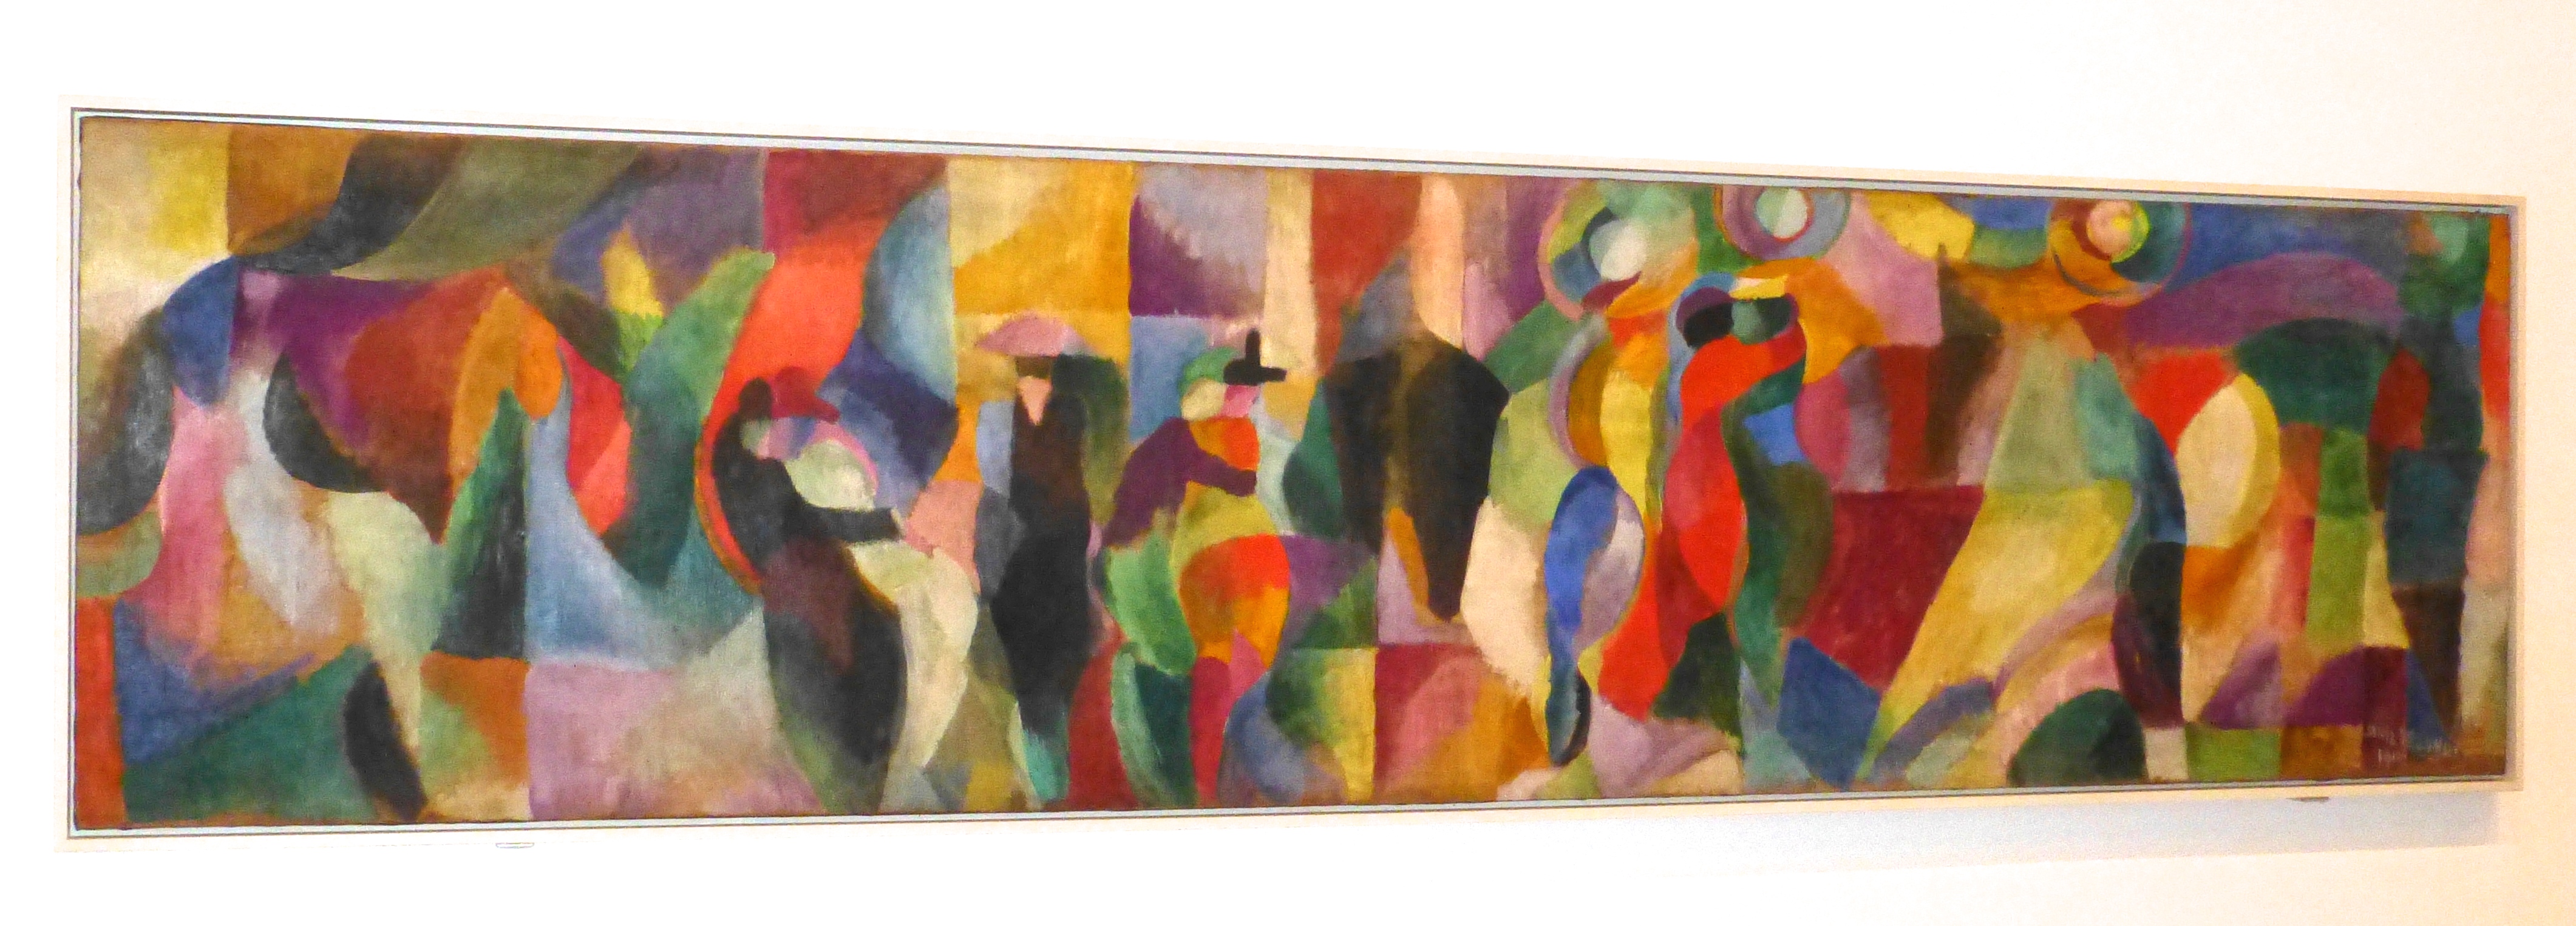 Read more about the article Sonia Delaunay at Tate Modern